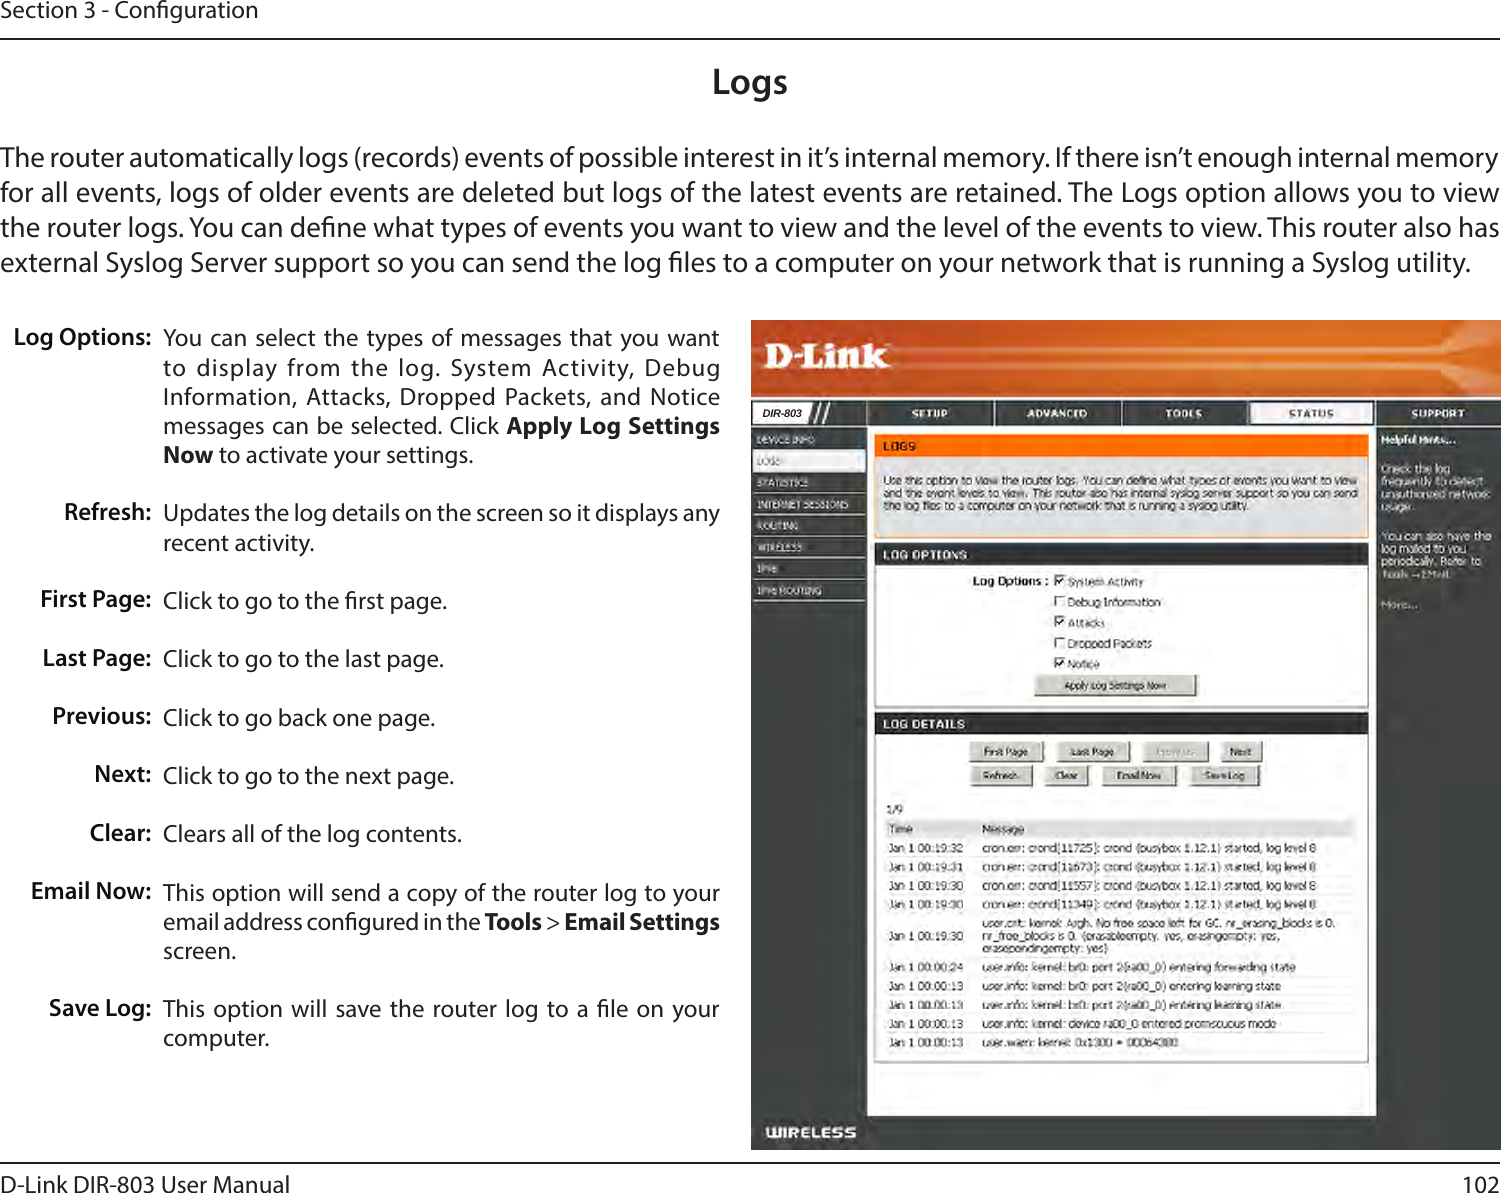 102D-Link DIR-803 User ManualSection 3 - CongurationLogsLog Options:Refresh:First Page:Last Page:Previous:Next:Clear:Email Now:Save Log:You can select the types of messages that you want to display from the log. System Activity, Debug Information, Attacks, Dropped Packets, and Notice messages can be selected. Click Apply Log Settings Now to activate your settings.Updates the log details on the screen so it displays any recent activity.Click to go to the rst page.Click to go to the last page.Click to go back one page.Click to go to the next page.Clears all of the log contents.This option will send a copy of the router log to your email address congured in the Tools &gt; Email Settings screen.This option will save the router log to a le on your computer.The router automatically logs (records) events of possible interest in it’s internal memory. If there isn’t enough internal memory for all events, logs of older events are deleted but logs of the latest events are retained. The Logs option allows you to view the router logs. You can dene what types of events you want to view and the level of the events to view. This router also has external Syslog Server support so you can send the log les to a computer on your network that is running a Syslog utility.DIR-803